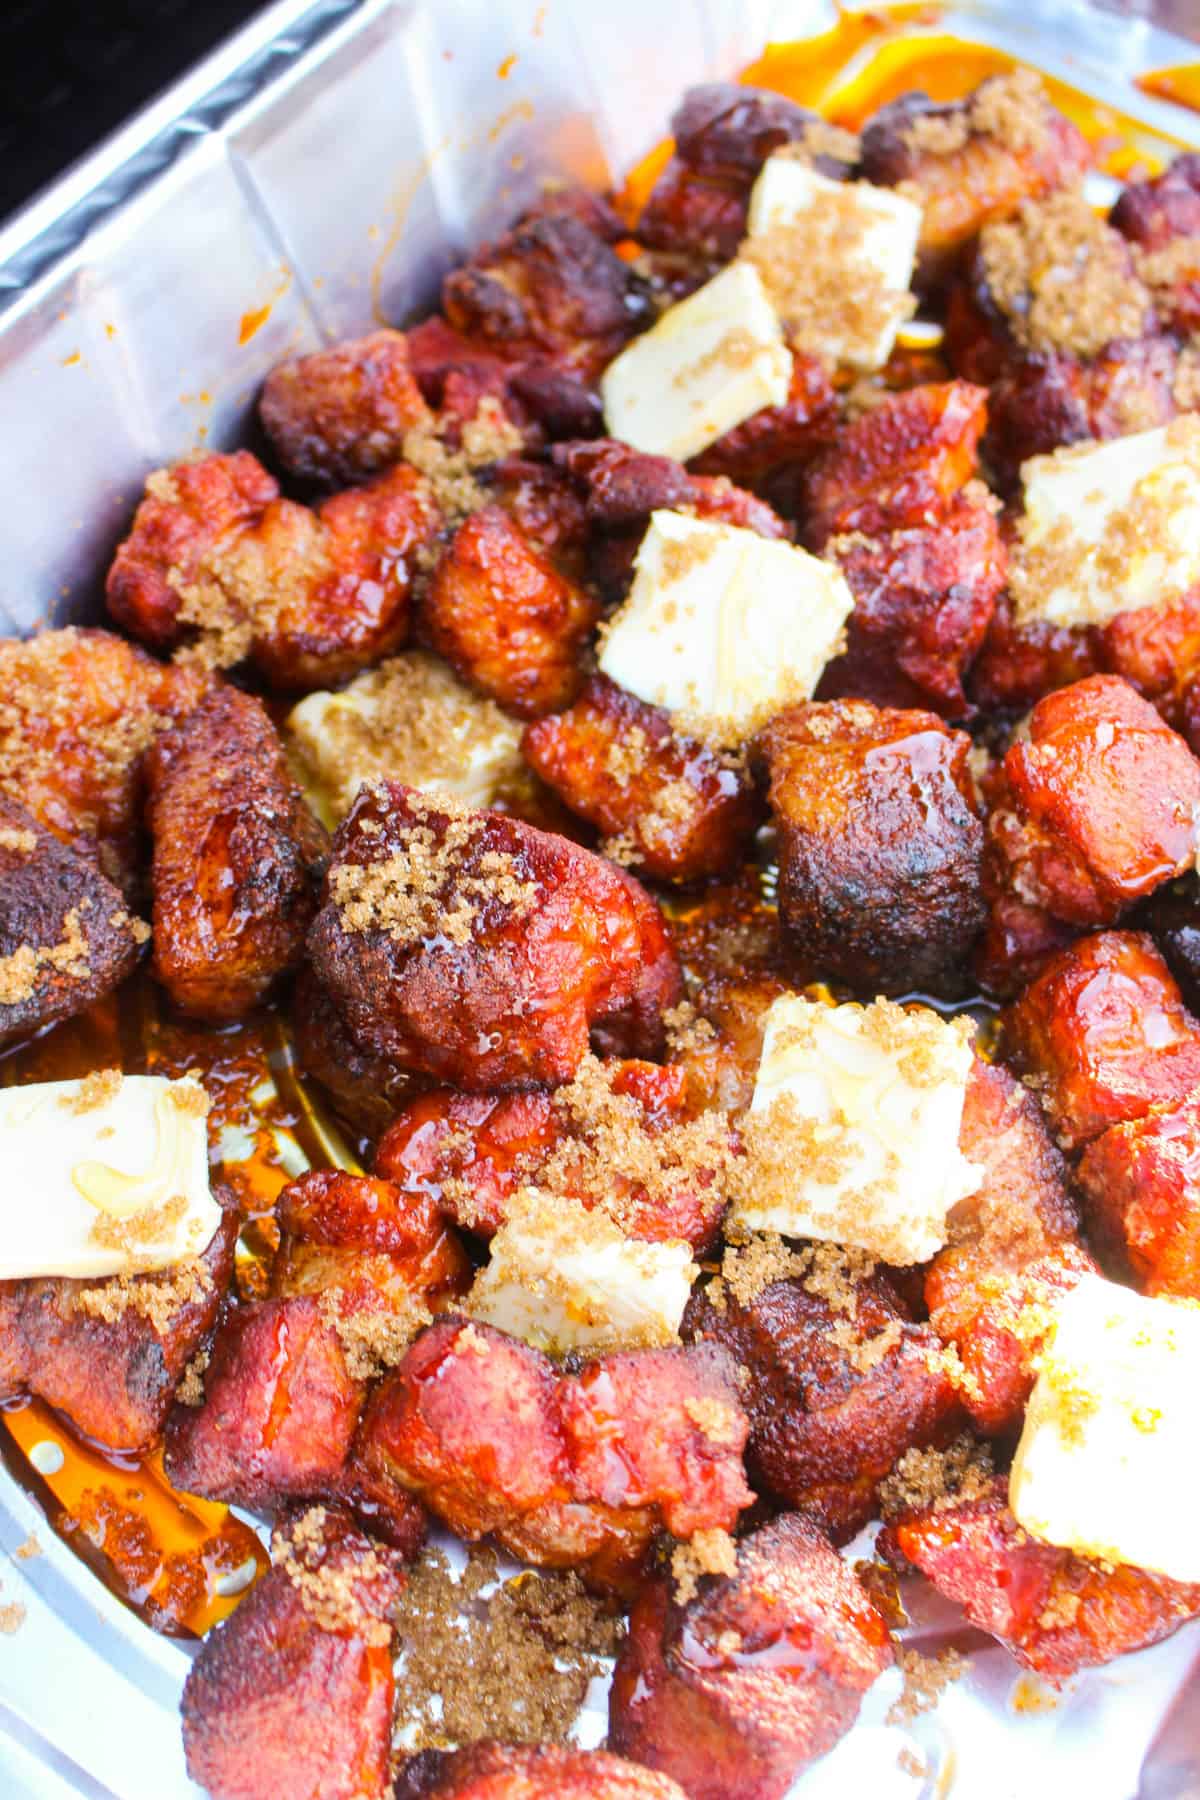 Adding butter, brown sugar and honey to the burnt ends.